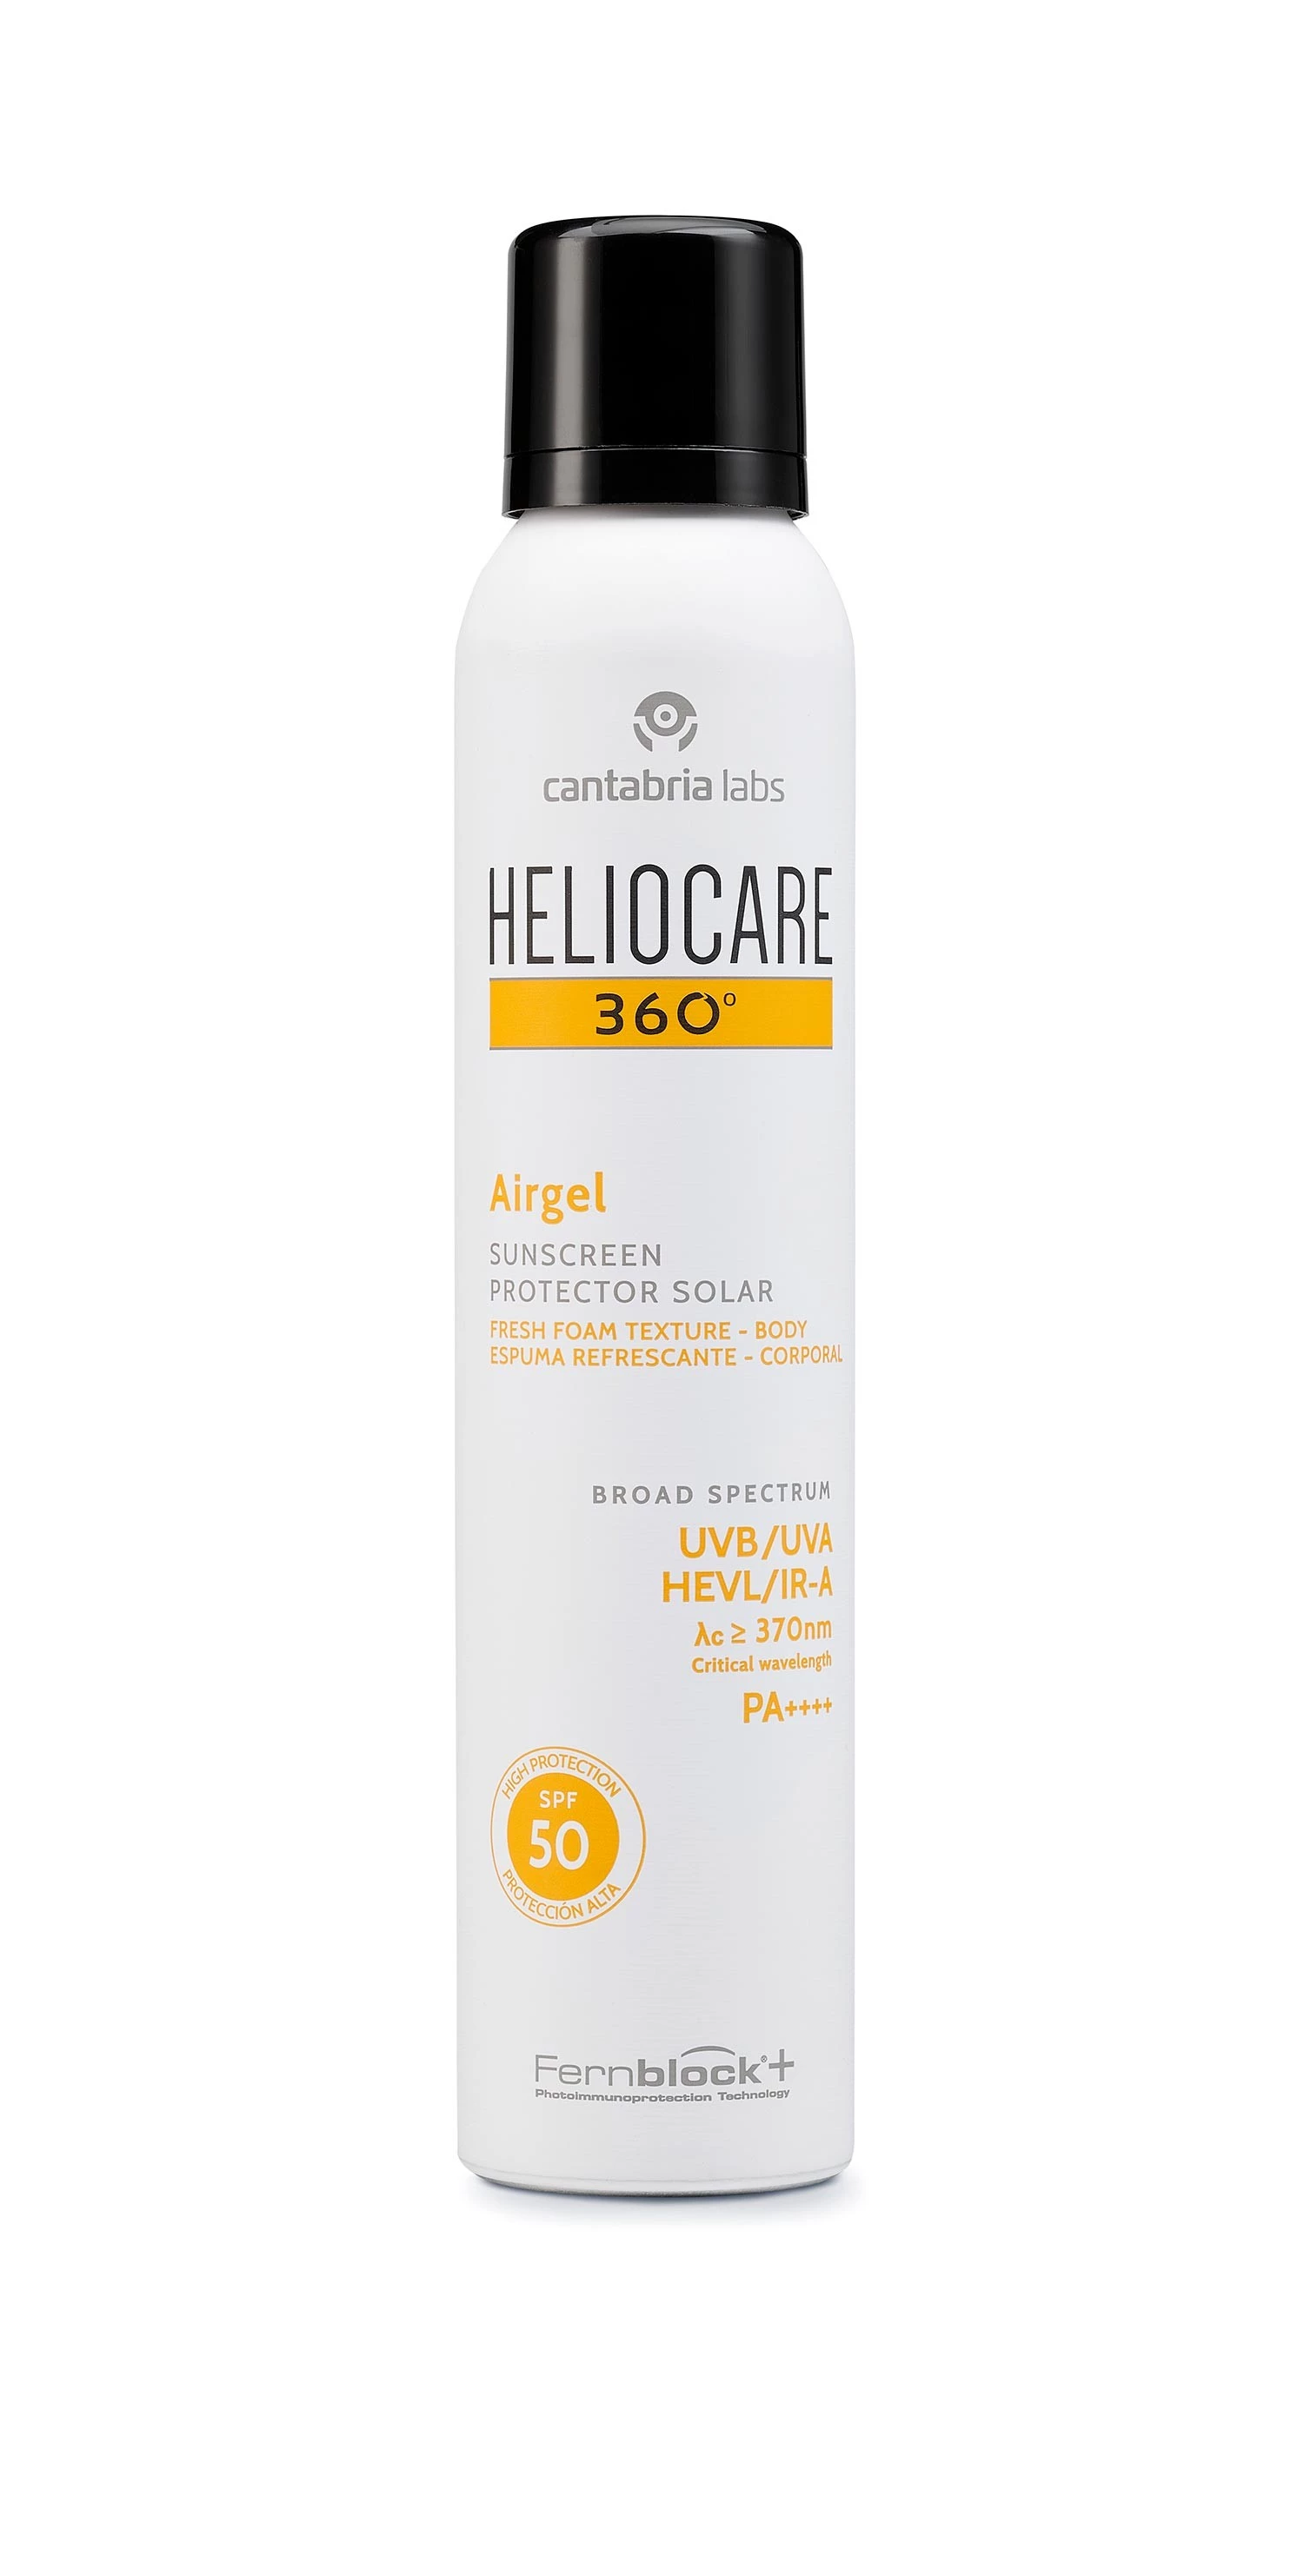 Heliocare 360 Airgel corporal